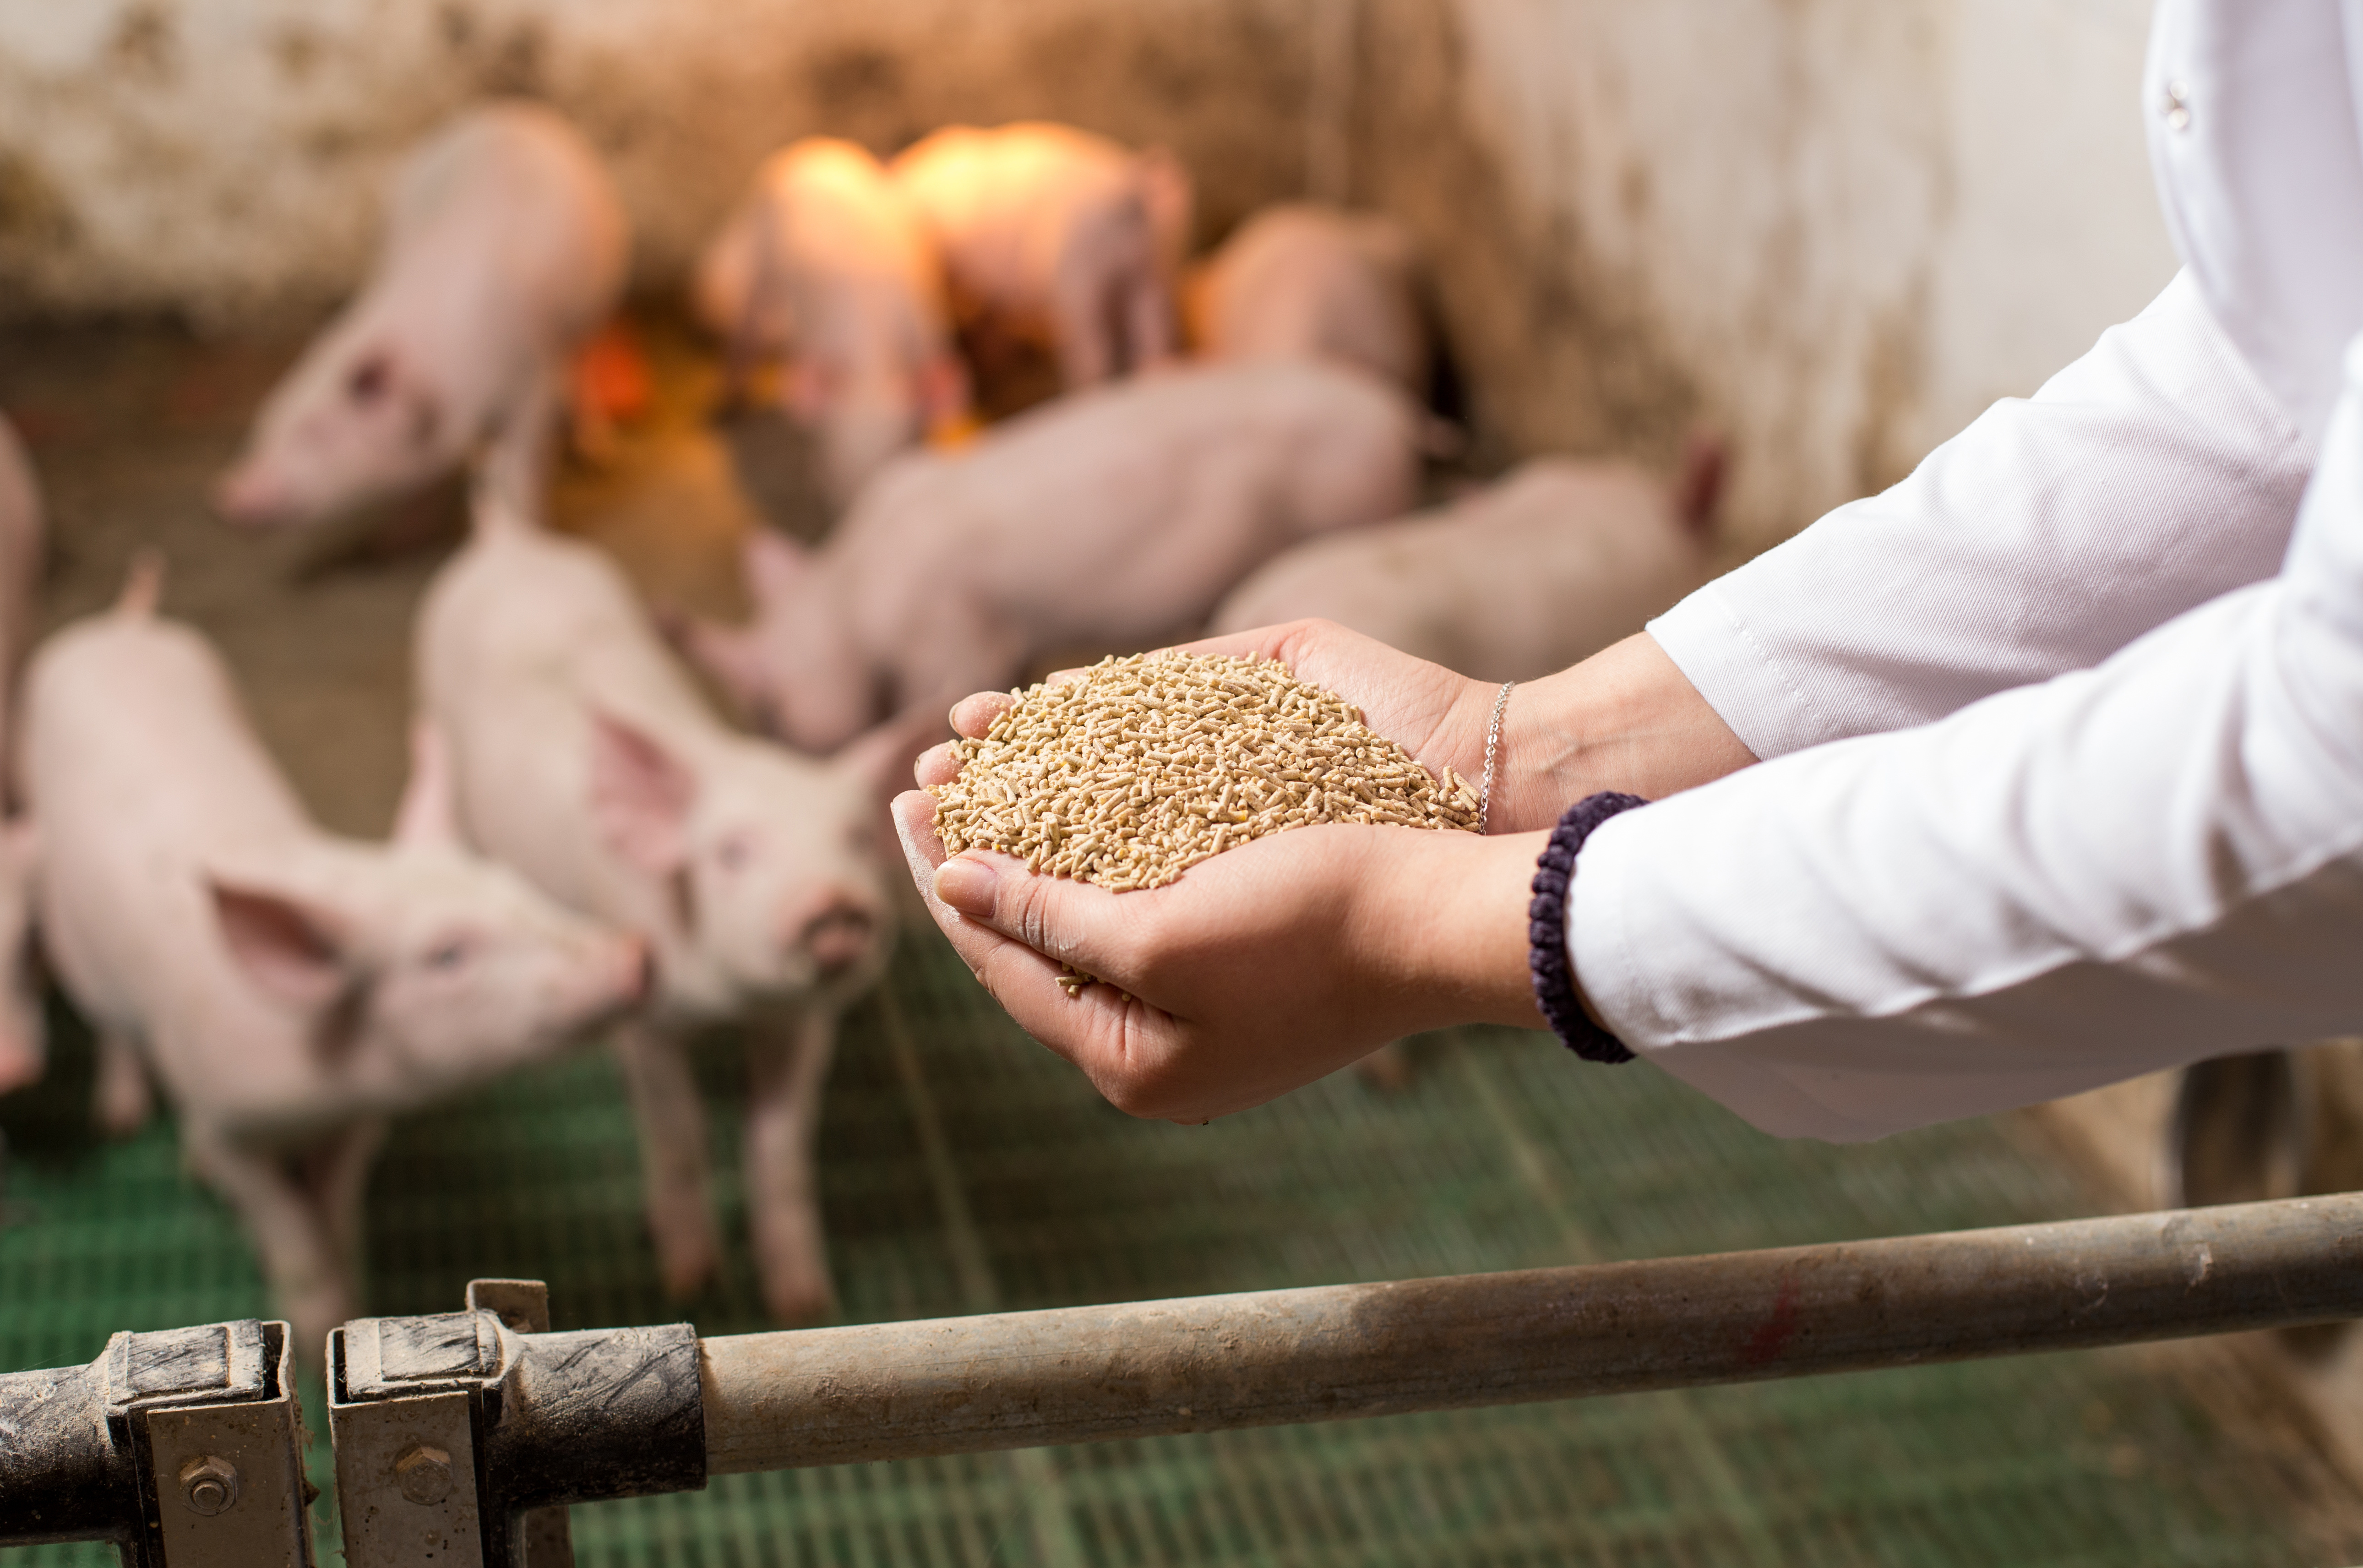 Person holding pig feed in their hands, while piglets move towards it